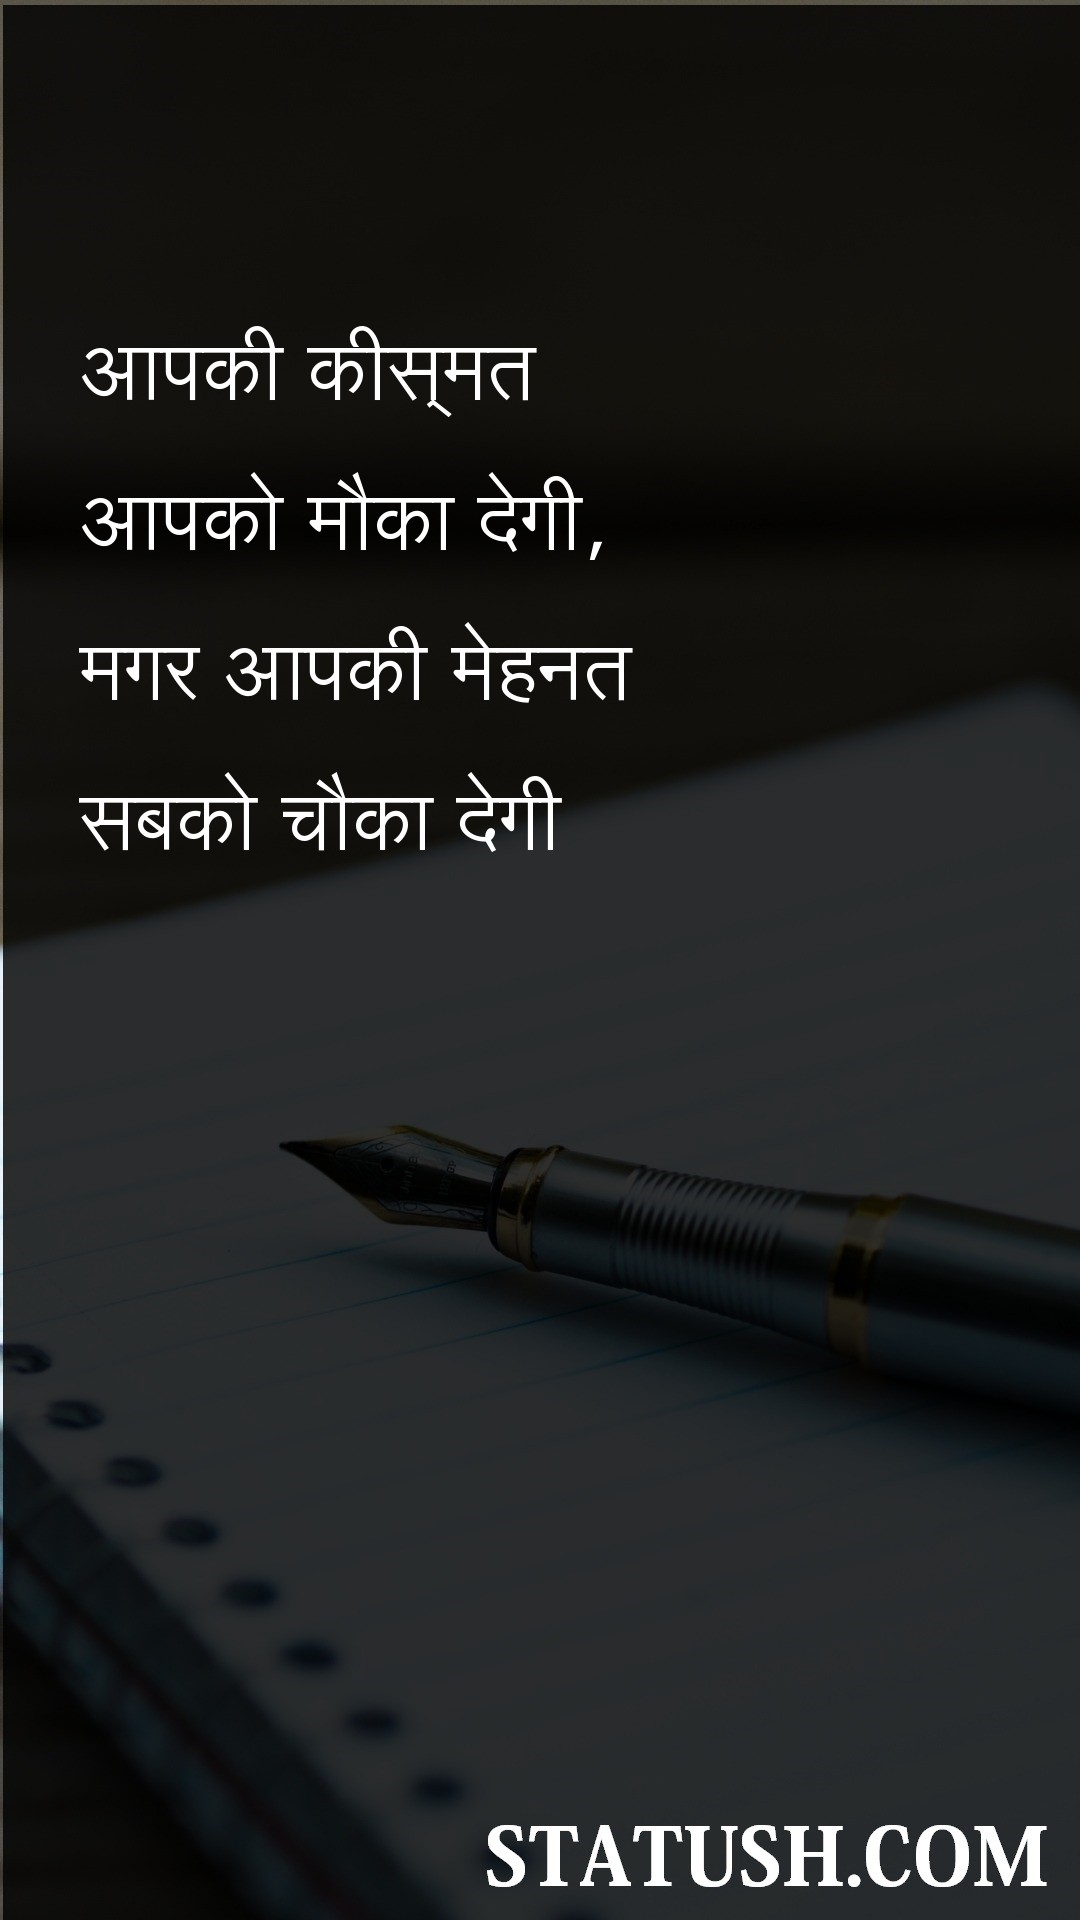 Your luck will give you a chance Hindi Quotes at statush.com